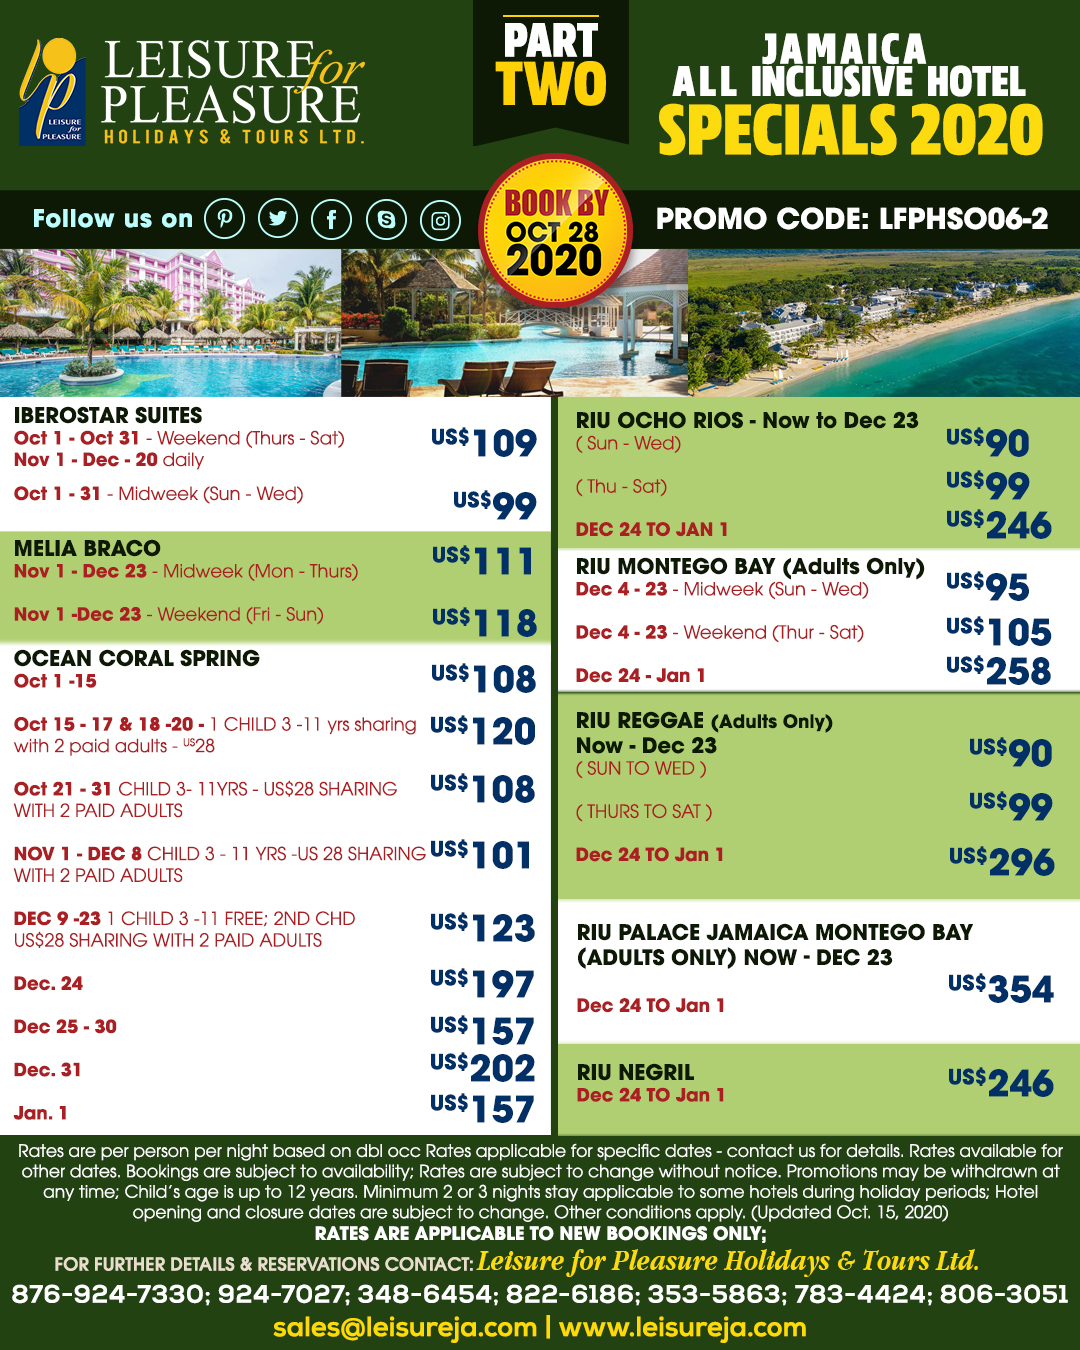 All Inclusive Hotel Specials, Updates on other Hotel Deals and Packages - Leisure For and Tours Limited - Travel Agency